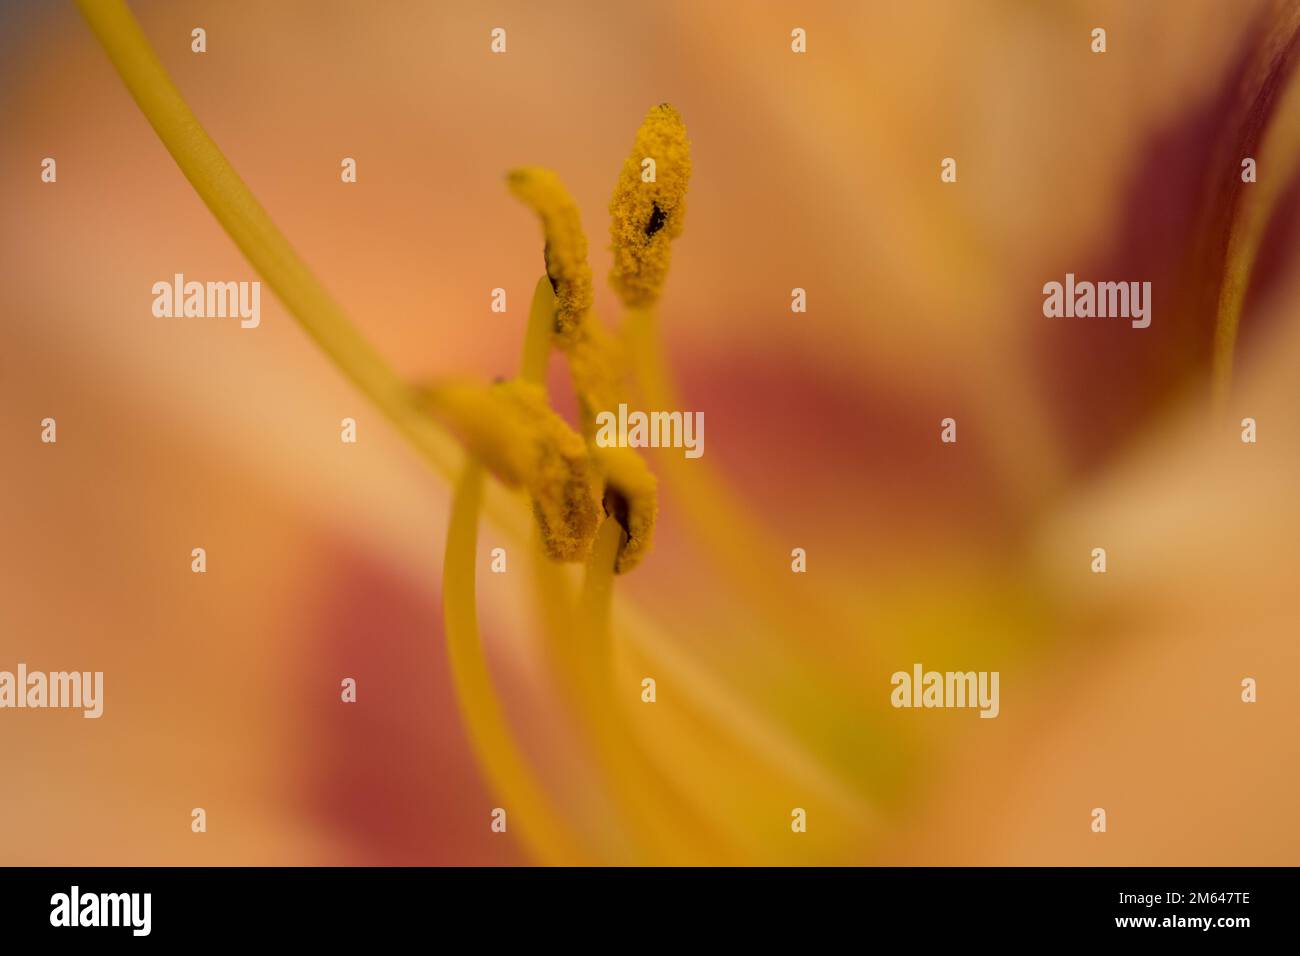 Close up on plant parts of a lily flower blossom Stock Photo